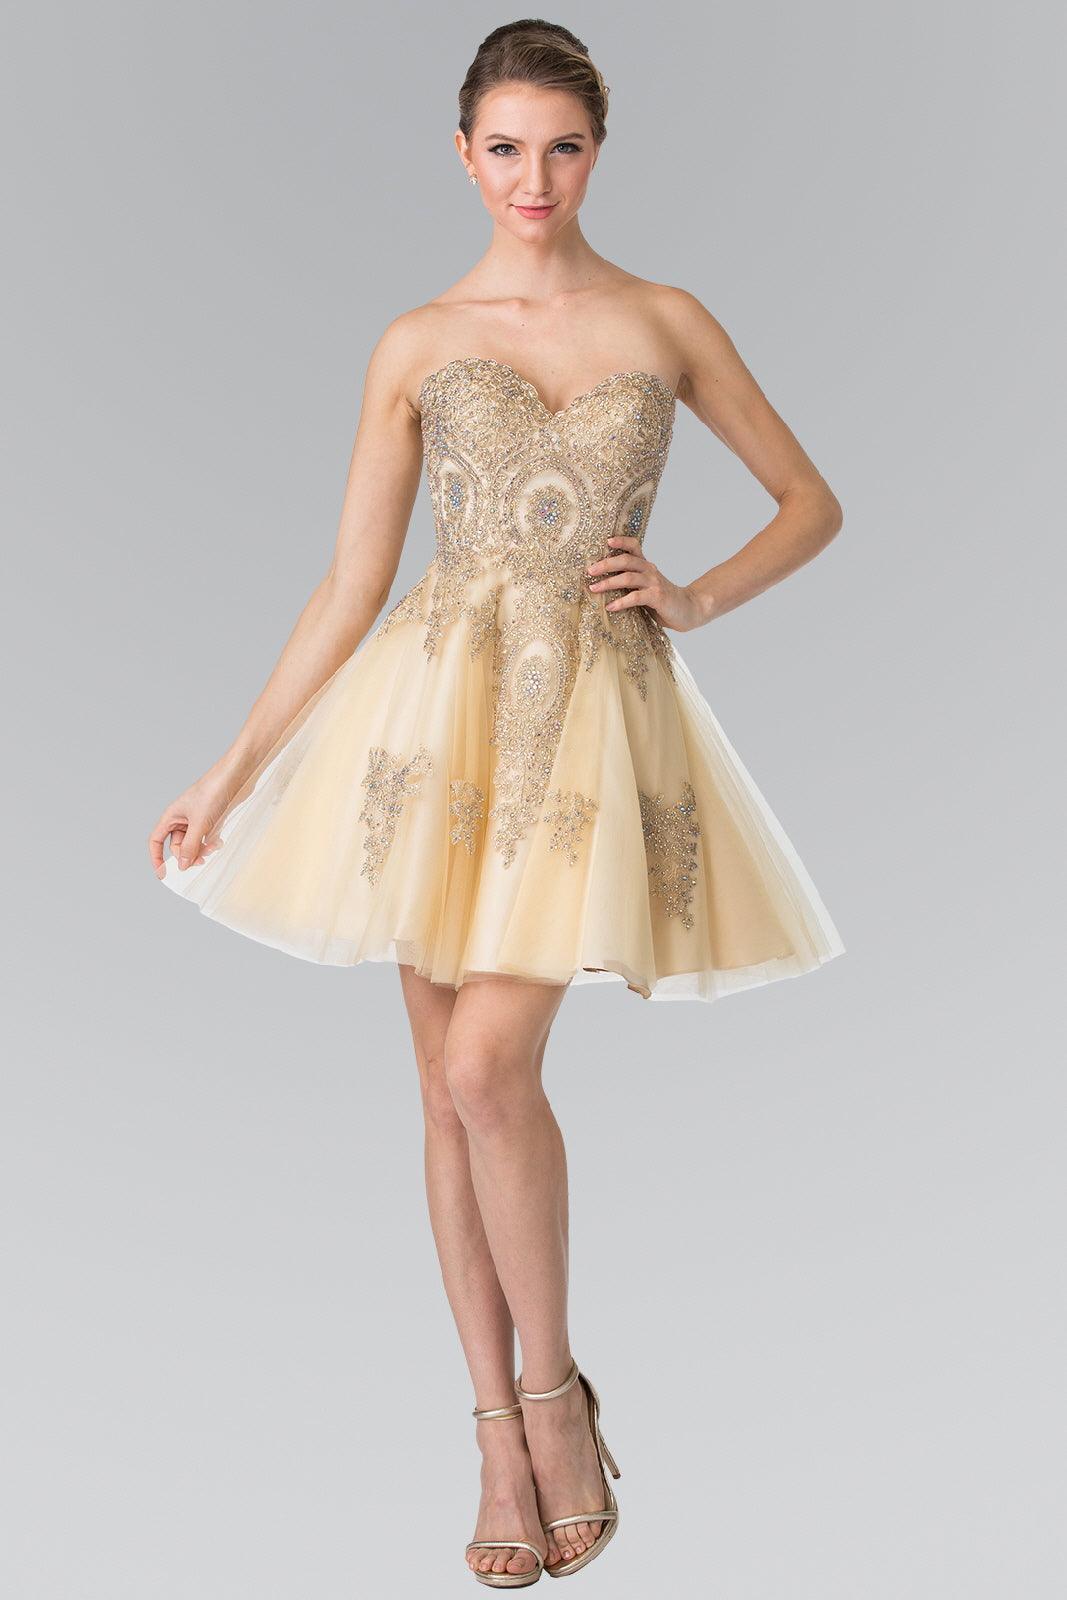 Homecoming Short Strapless Prom Cocktail Dress - The Dress Outlet